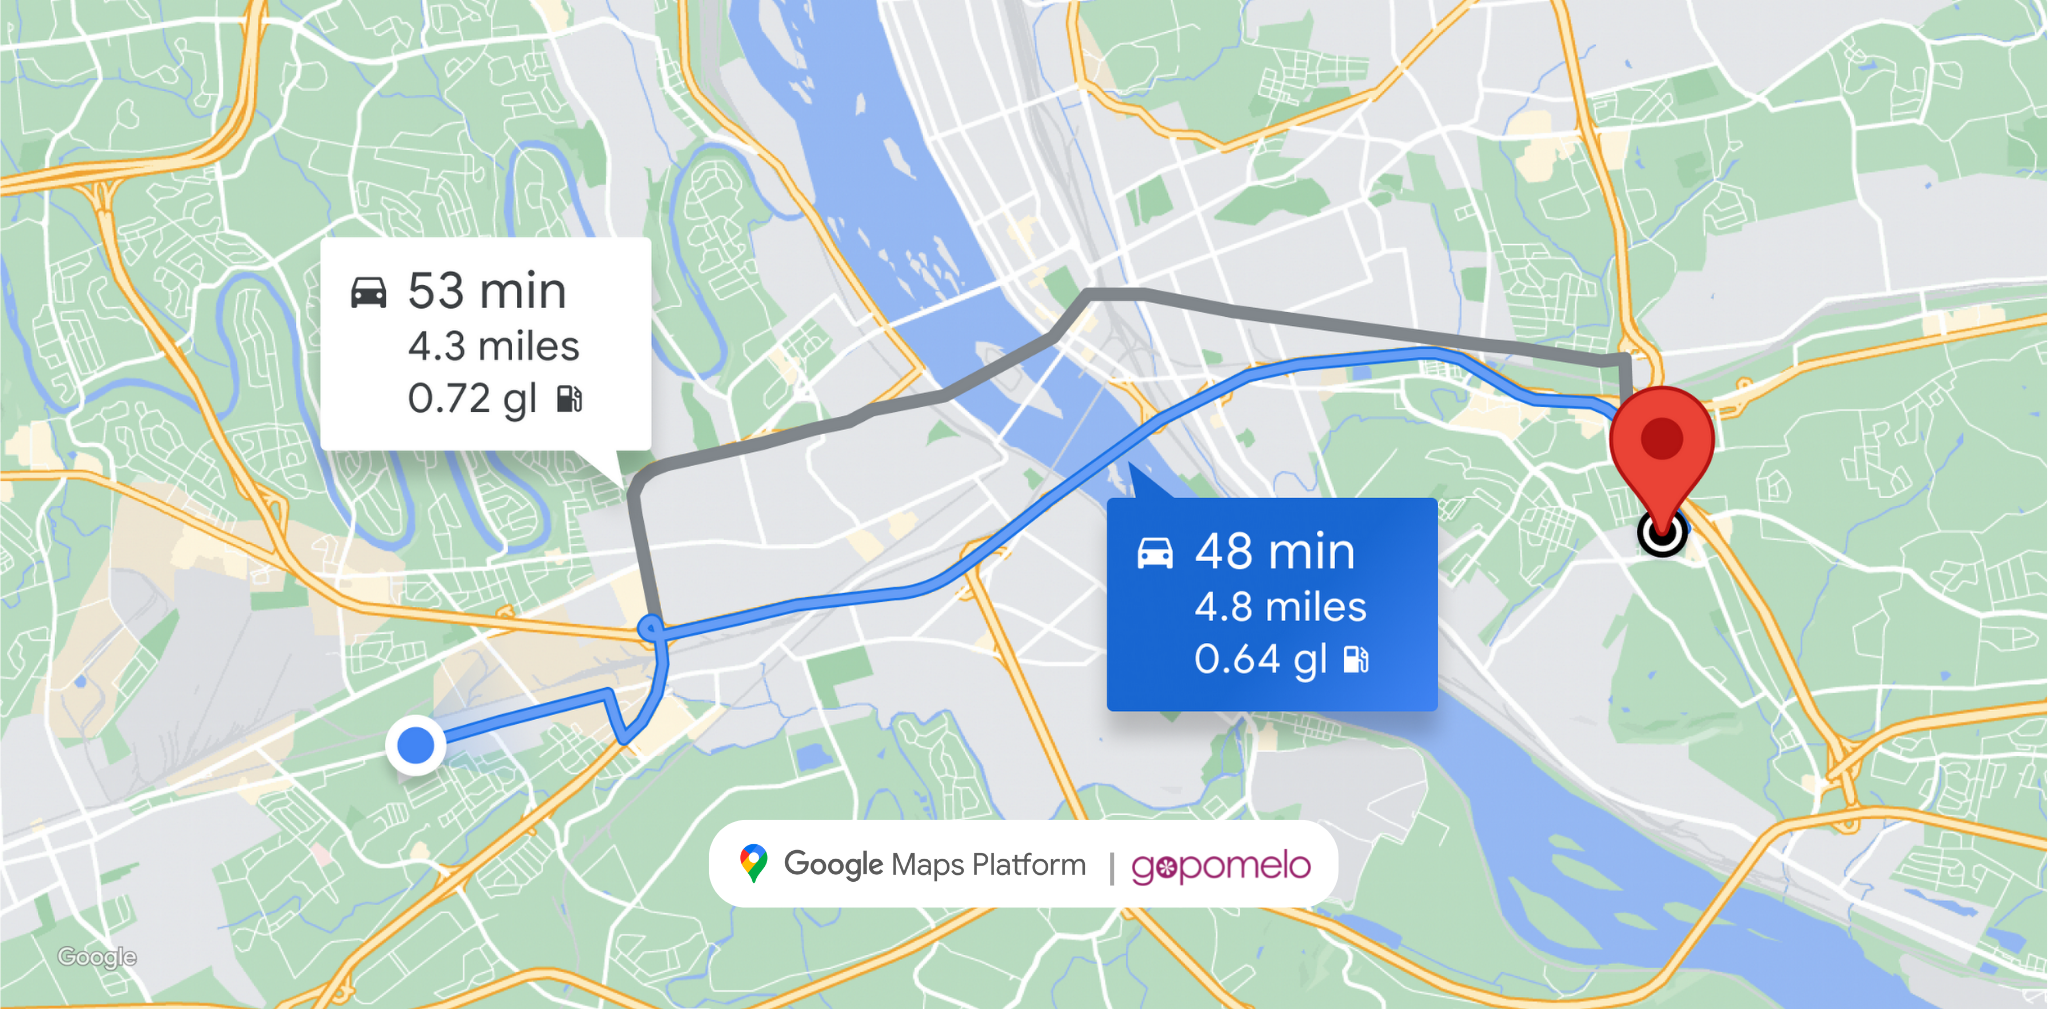 Google recently announced eco-friendly routing leading to more sustainably by using Google Maps Platform! | GoPomelo